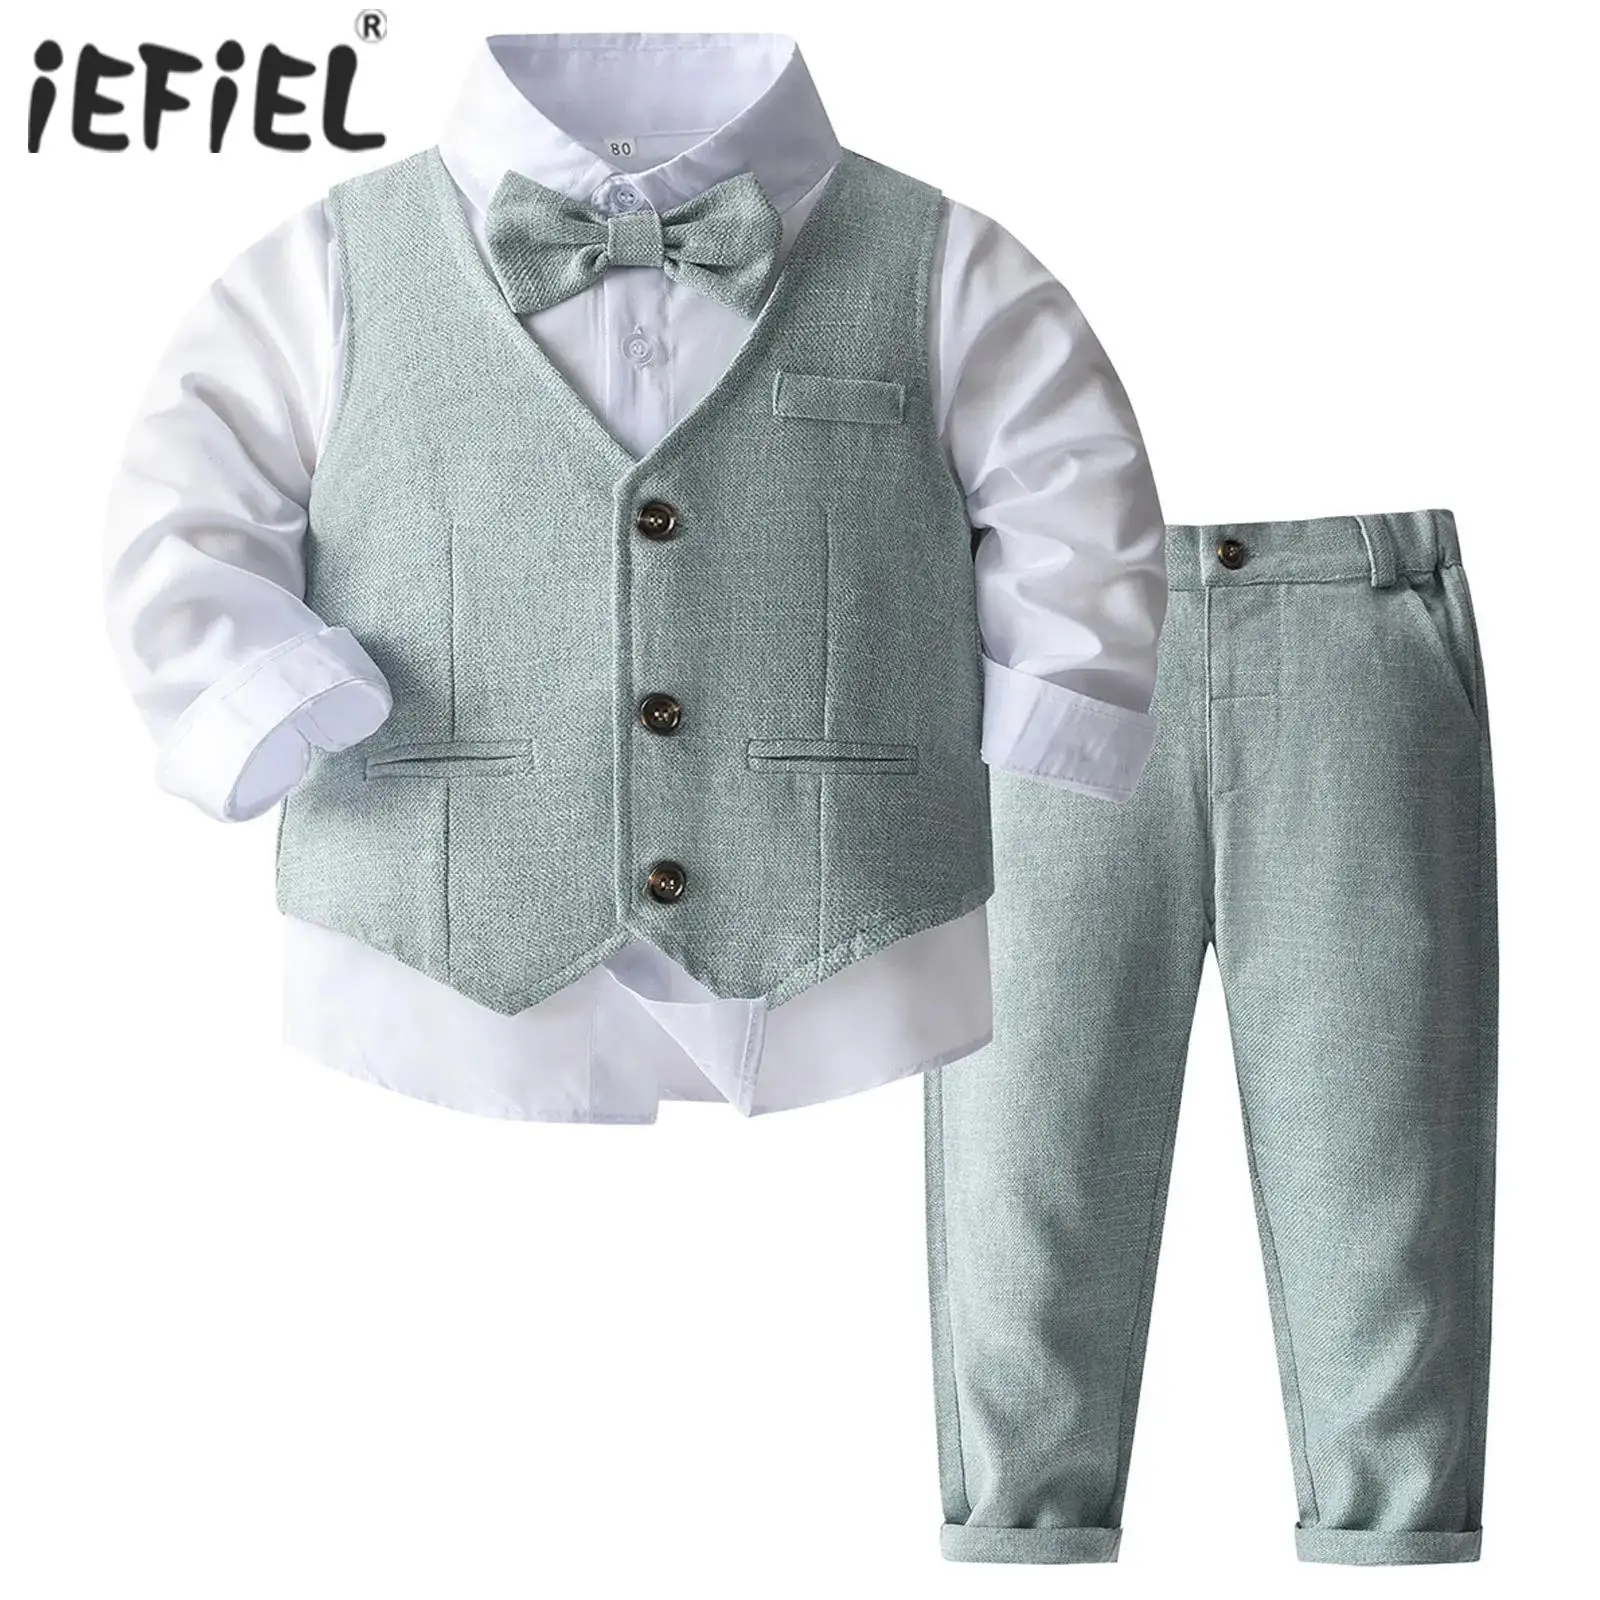 

4Pcs Baby Boys Gentleman Cotton Suit Toddler Outfit Birthday Party Wedding Performance Long Sleeve Shirt Bowtie Vest Pants Set